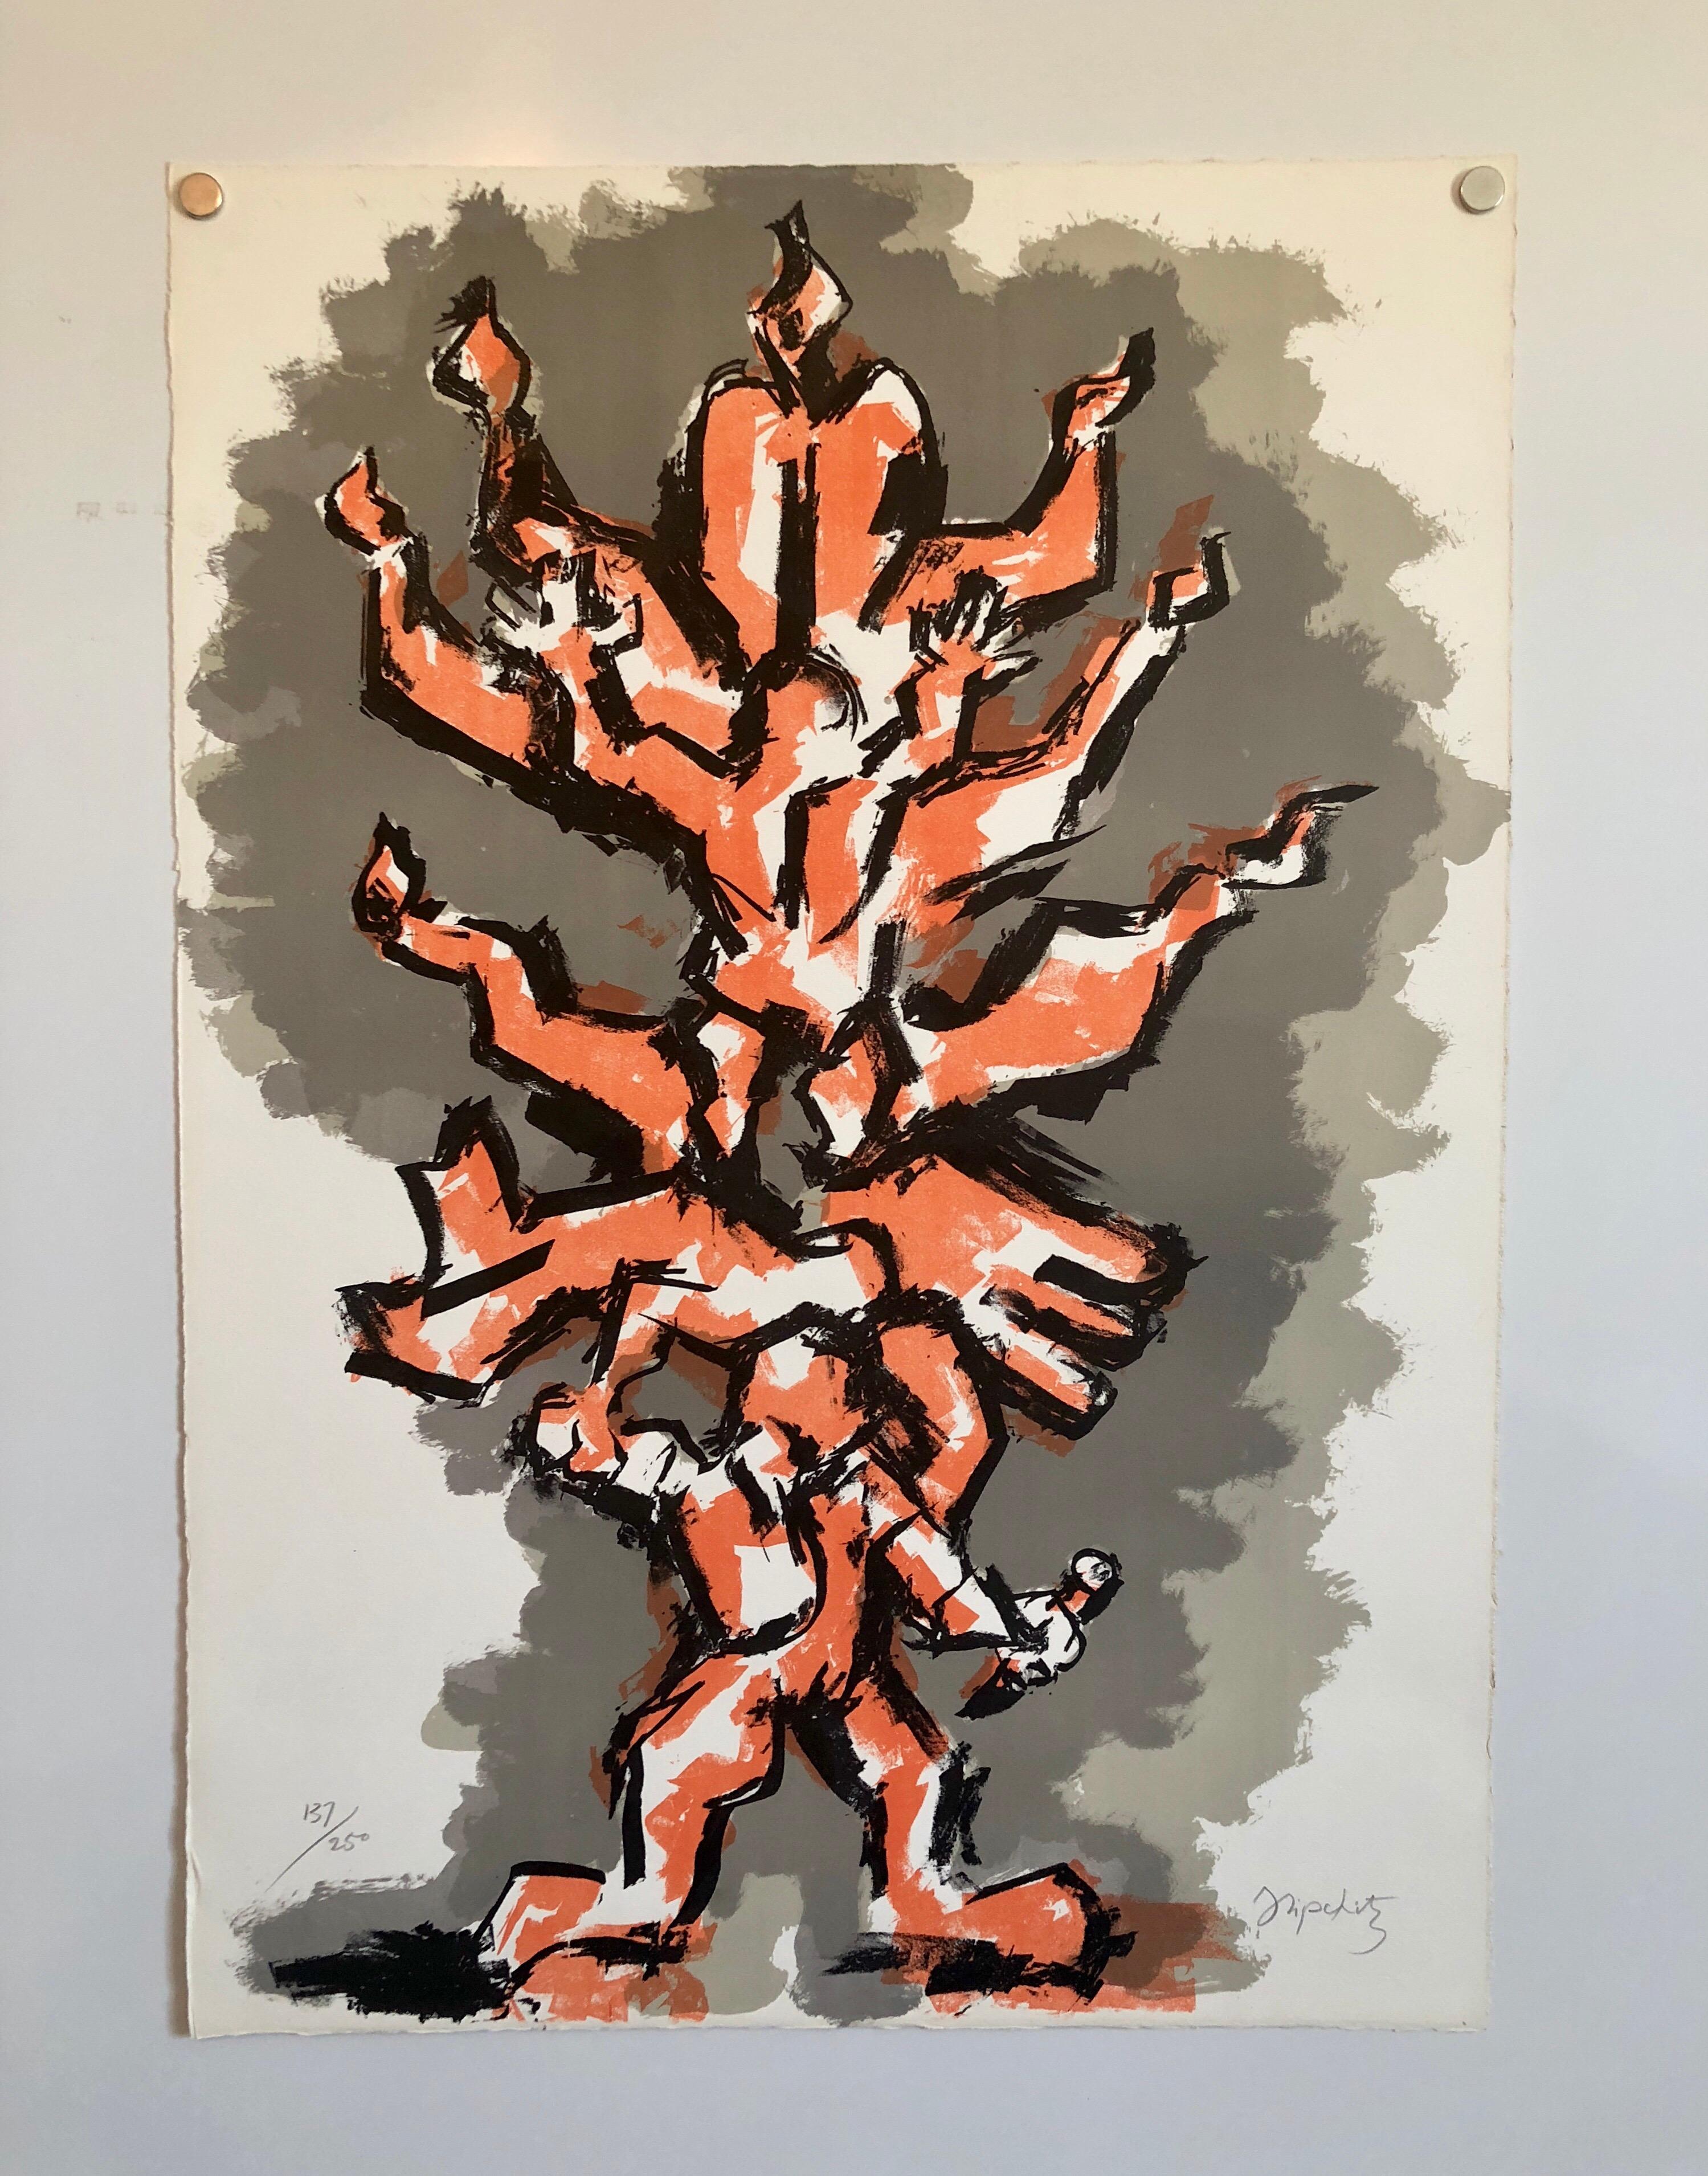 Large Color French Cubist Lithograph Tree of Life Signed Ltd Ed. Sculpture Study 1